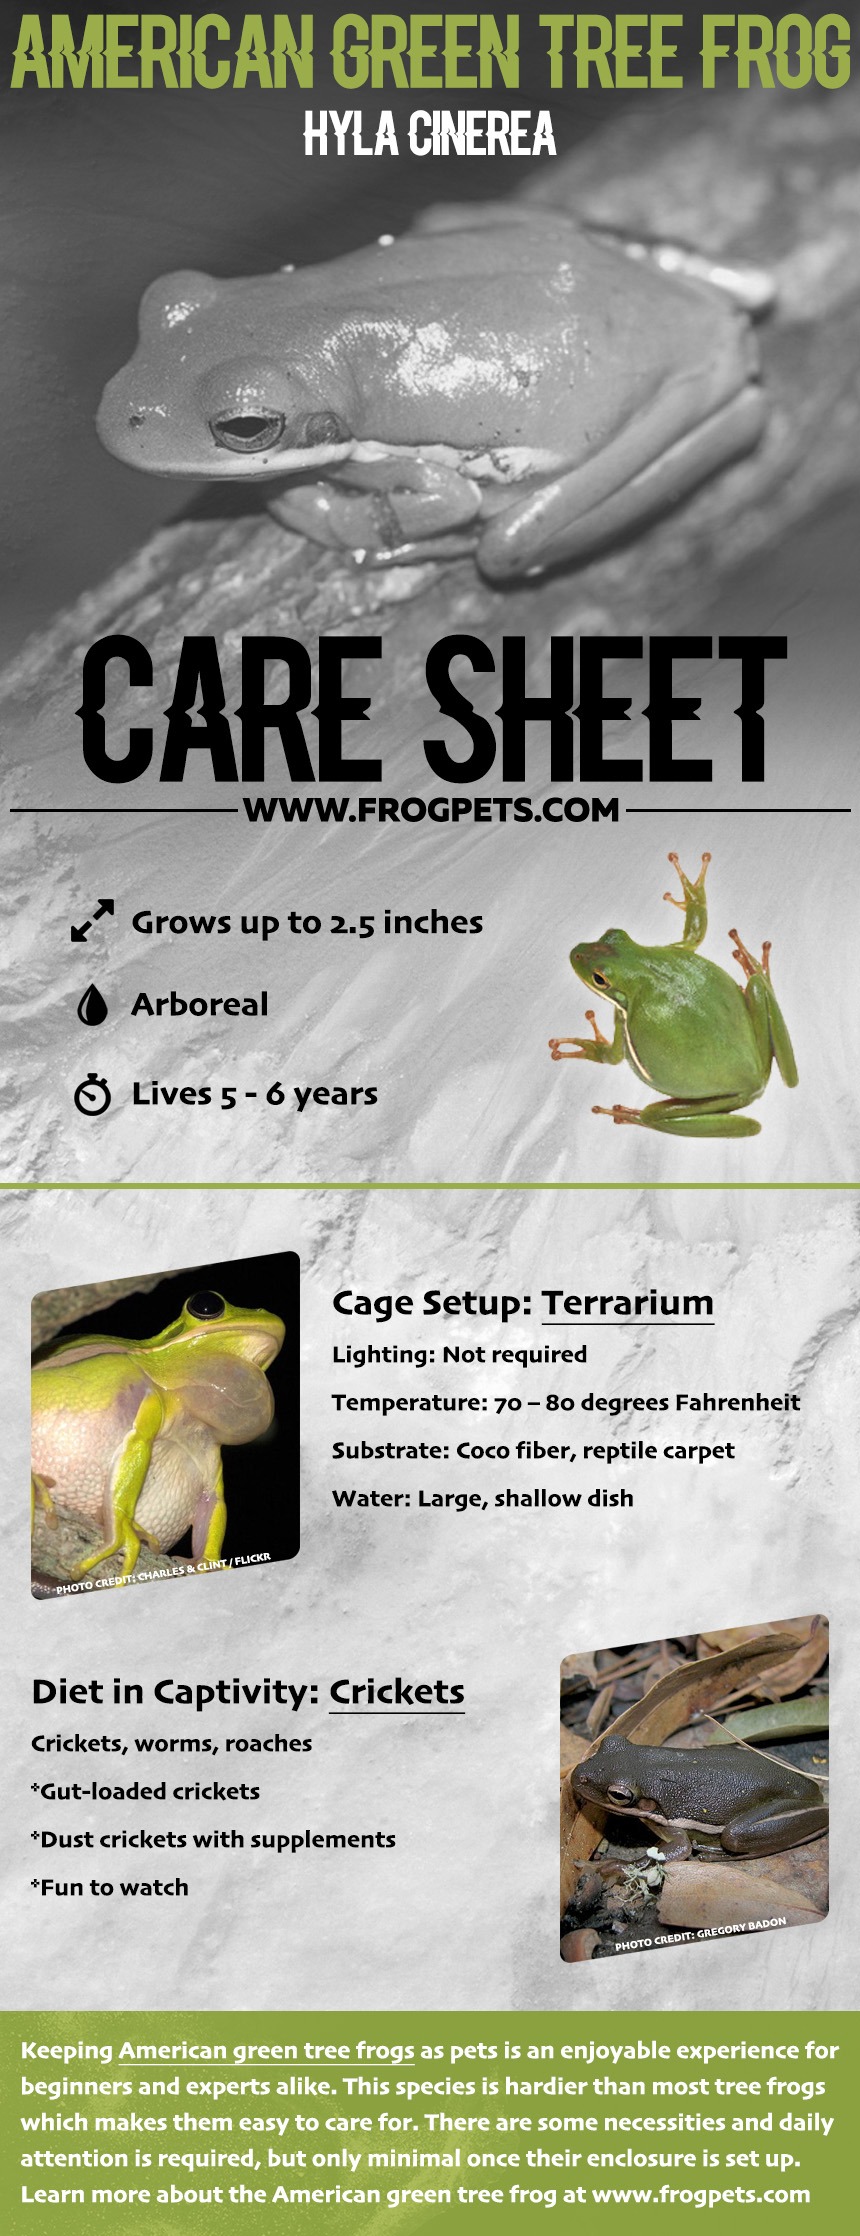 Infographic on American Green Tree Frogs